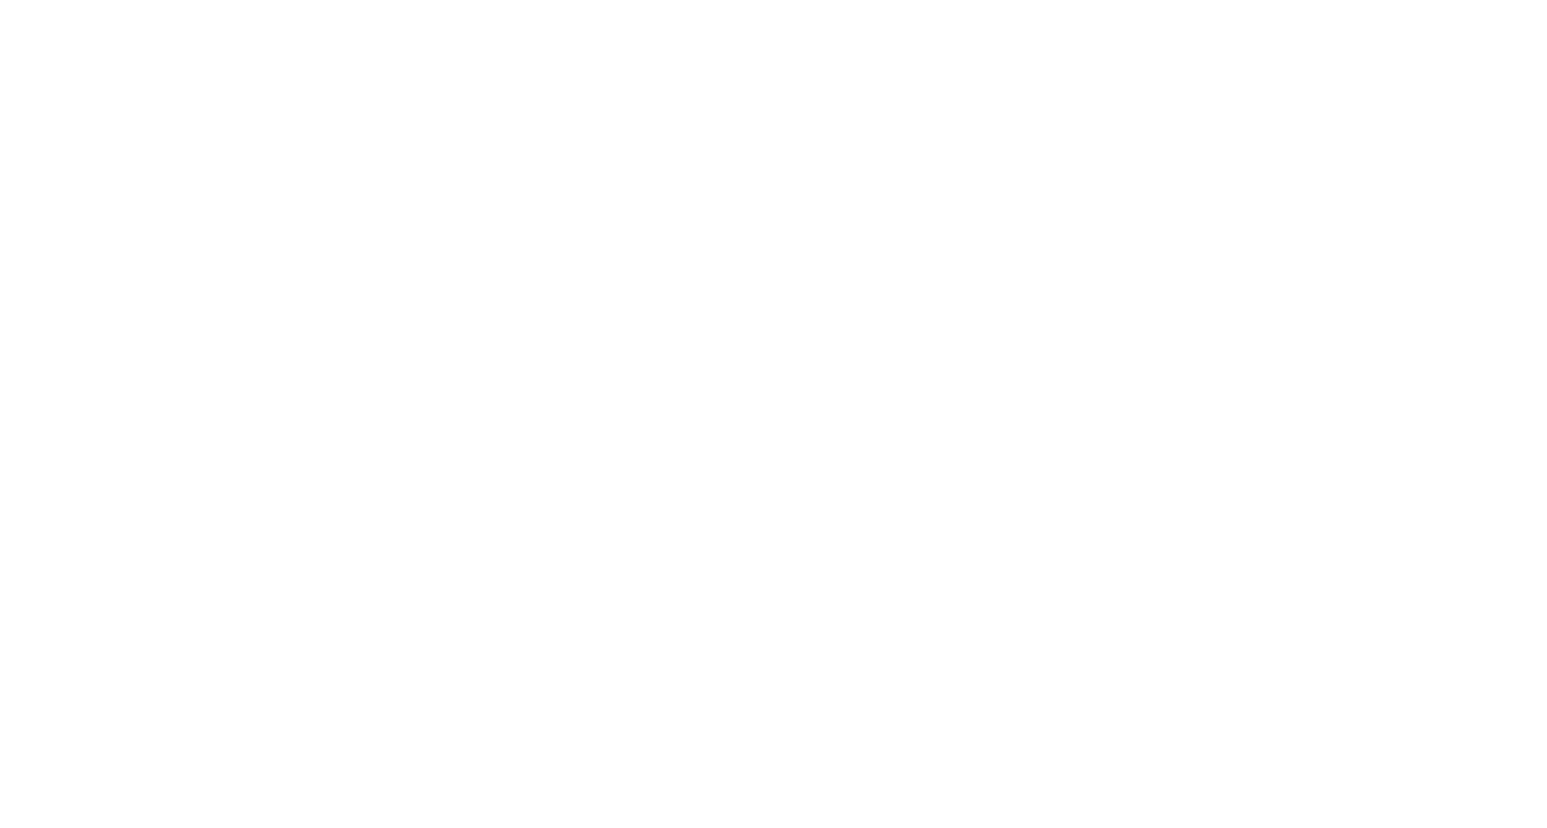 Limnios Property Group - Perth